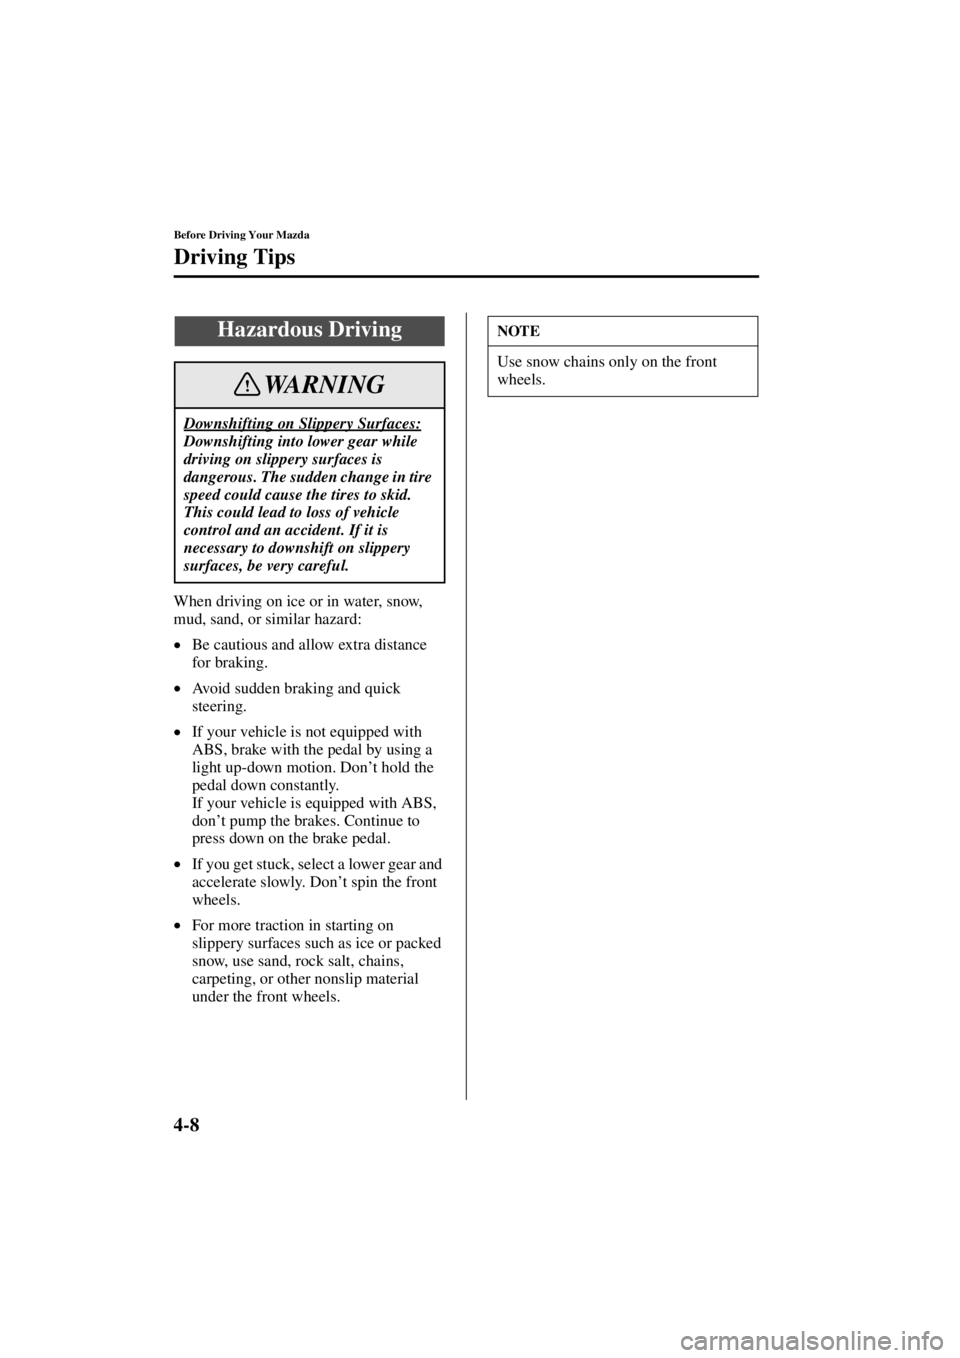 MAZDA MODEL 3 5-DOOR 2004  Owners Manual 4-8
Before Driving Your Mazda
Driving Tips
Form No. 8S18-EA-03I
When driving on ice or in water, snow, 
mud, sand, or similar hazard:
•Be cautious and allow extra distance 
for braking.
• Avoid su